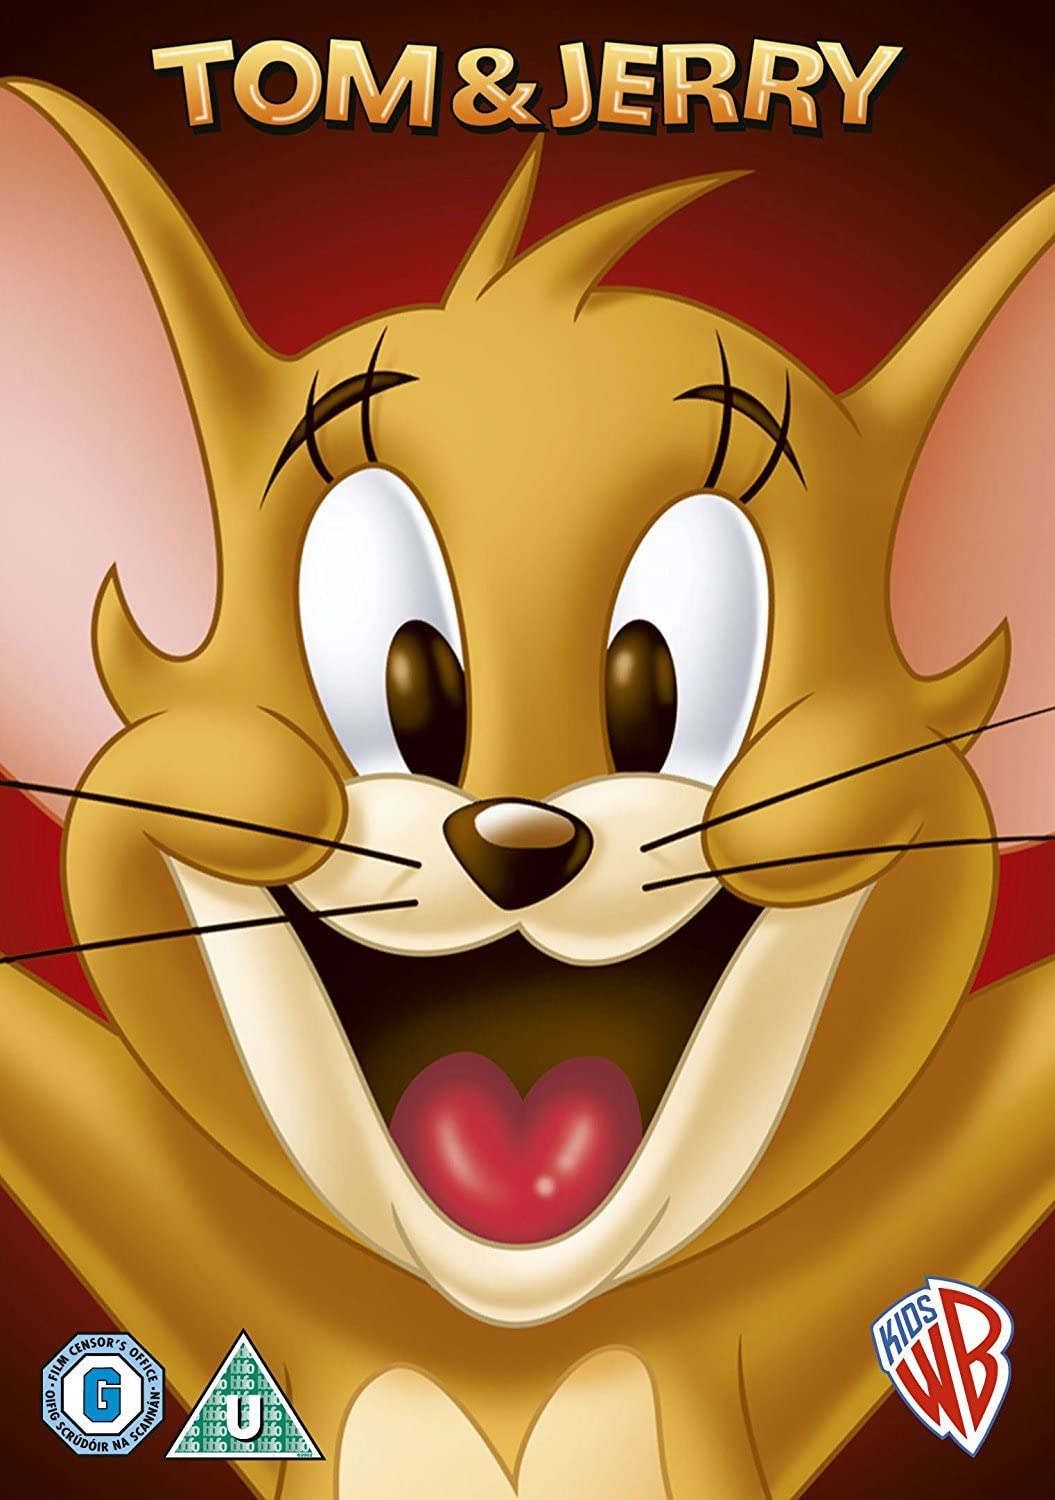 Tom And Jerry And Friends: Volume 2 [Jerry] [Tom And Jerry Adventures] [DVD] [2010] [2011] - Family/Musical [DVD]